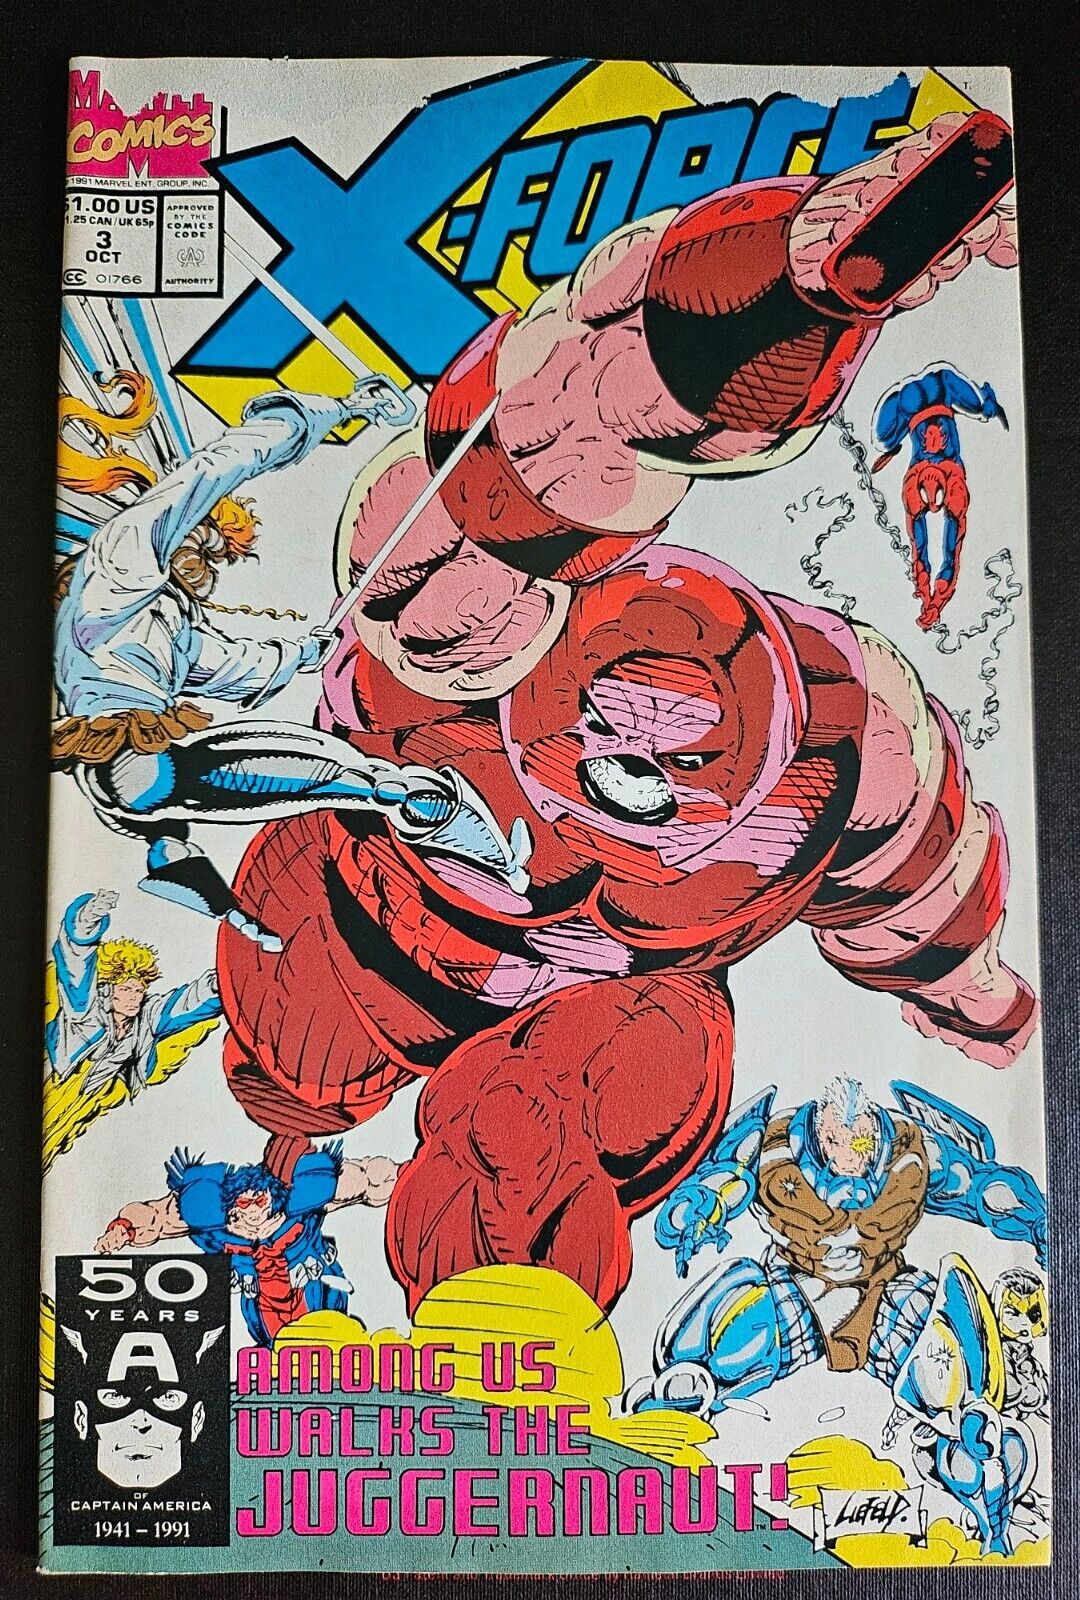 X-Force #3 Marvel Juggernaut CABLE SPIDER-MAN Rob Liefeld OCT 1991